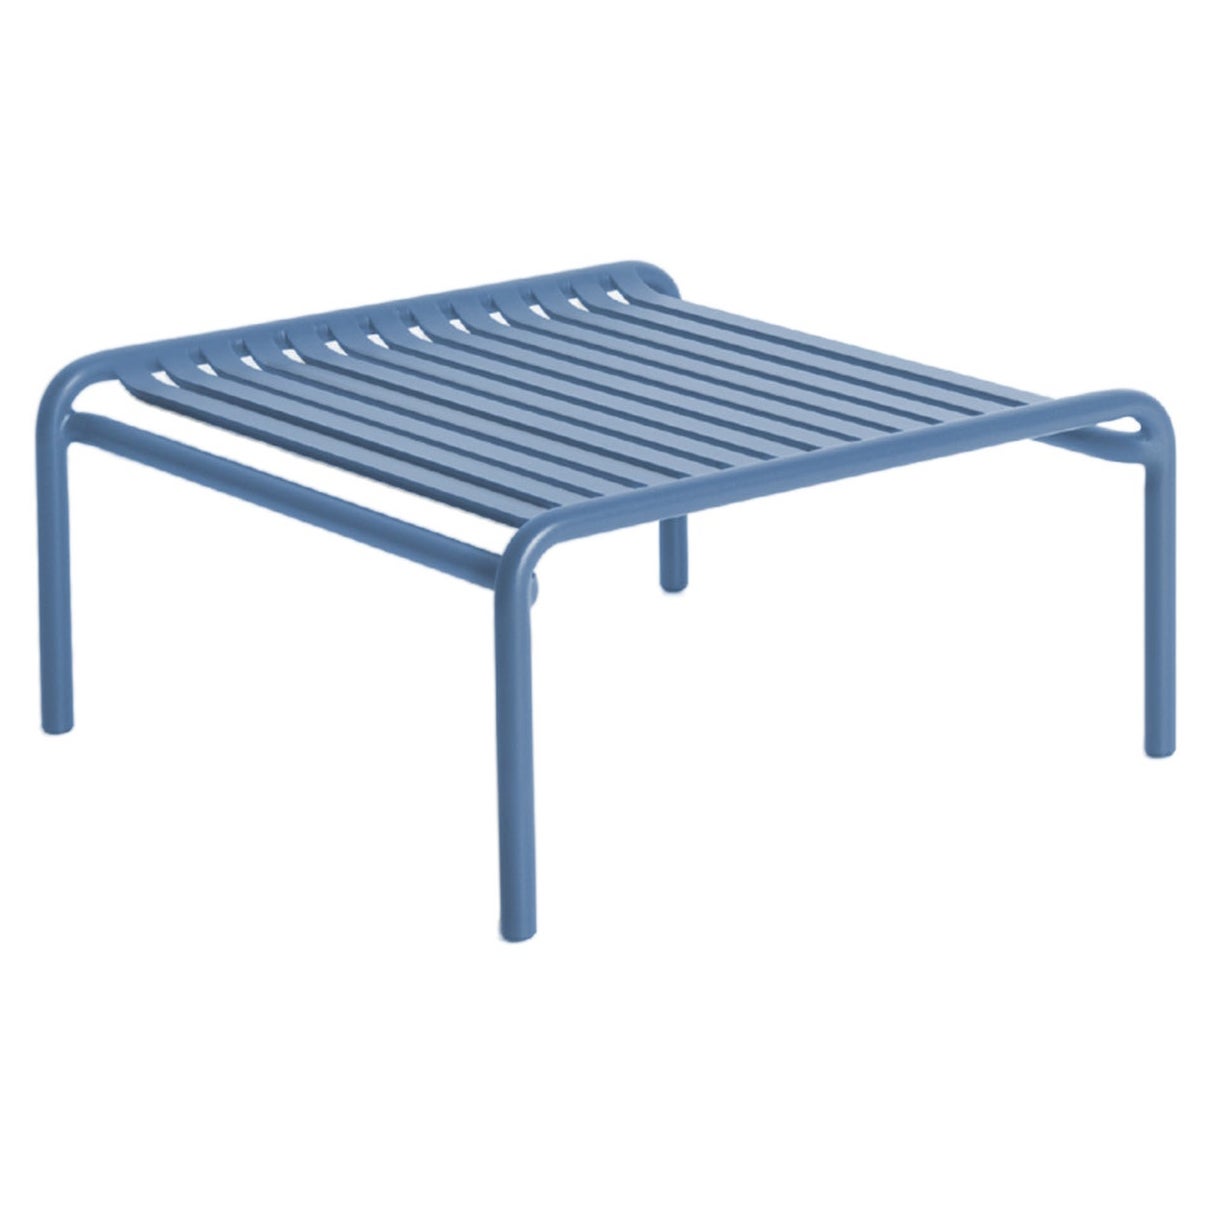 Petite Friture Week-End Coffee Table in Azur Blue Aluminium, 2017 For Sale